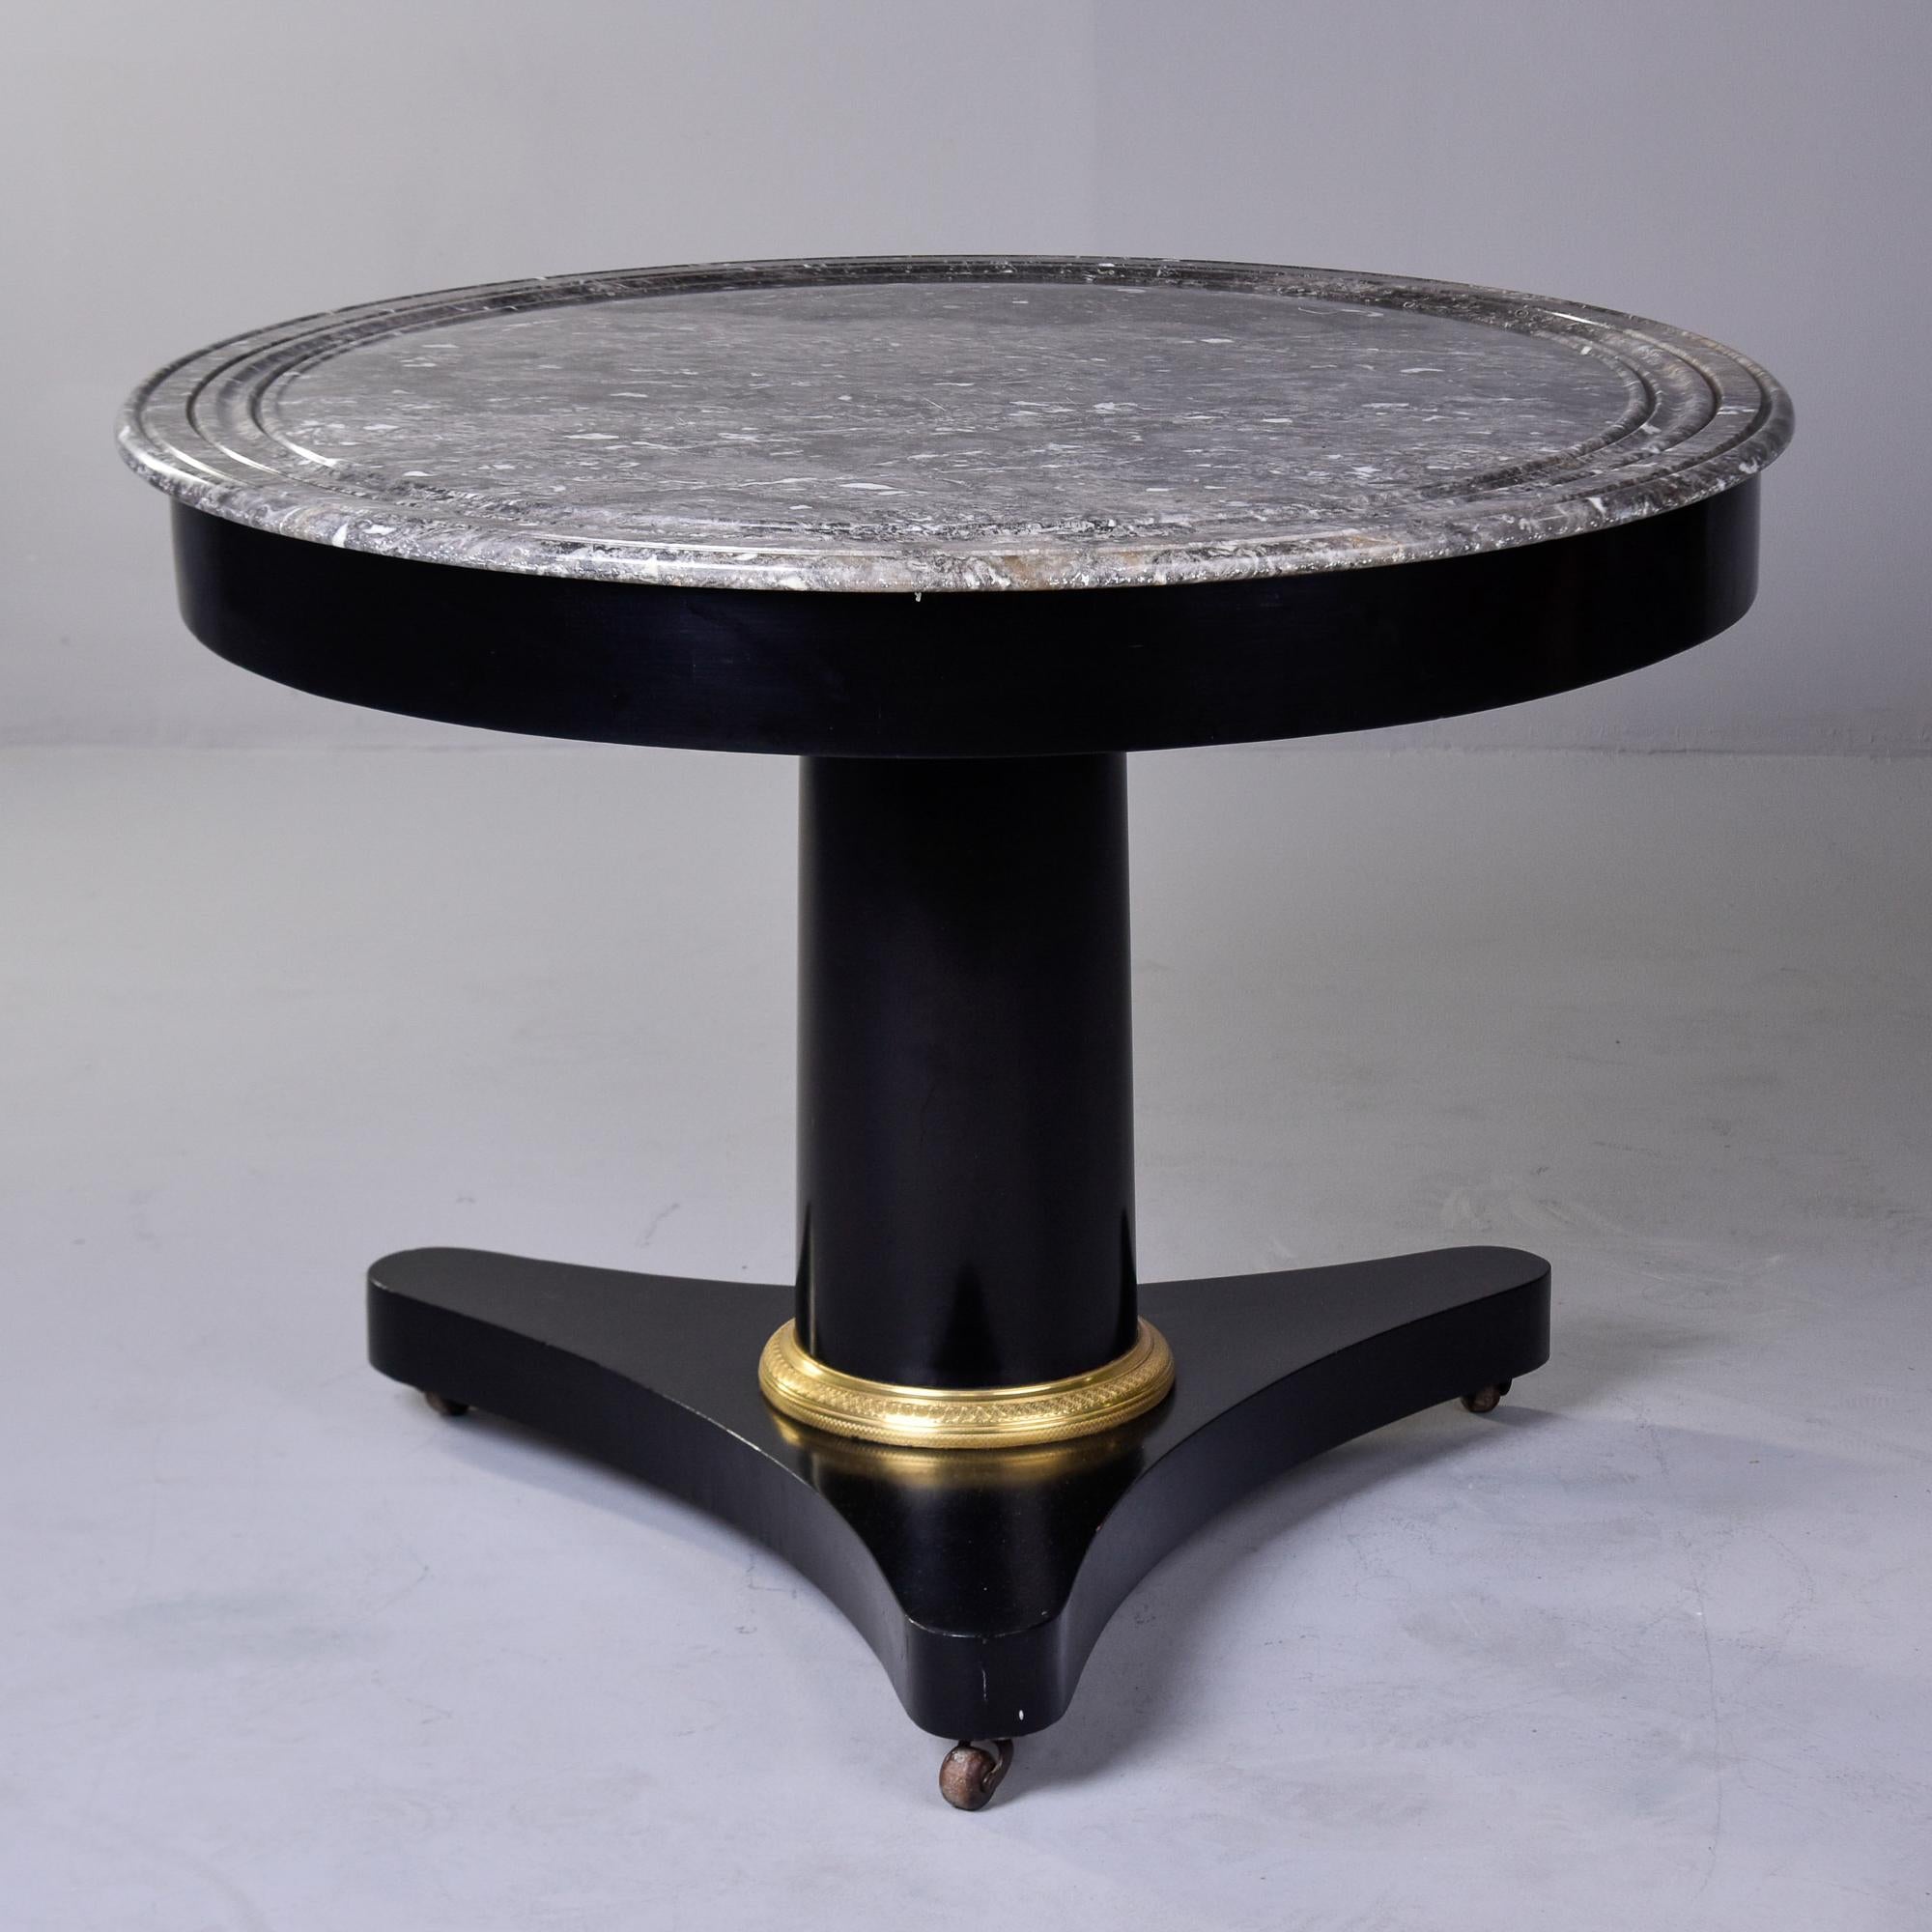 French ebonized 19th Century Mahogany Round Center Empire Table with Marble Top For Sale